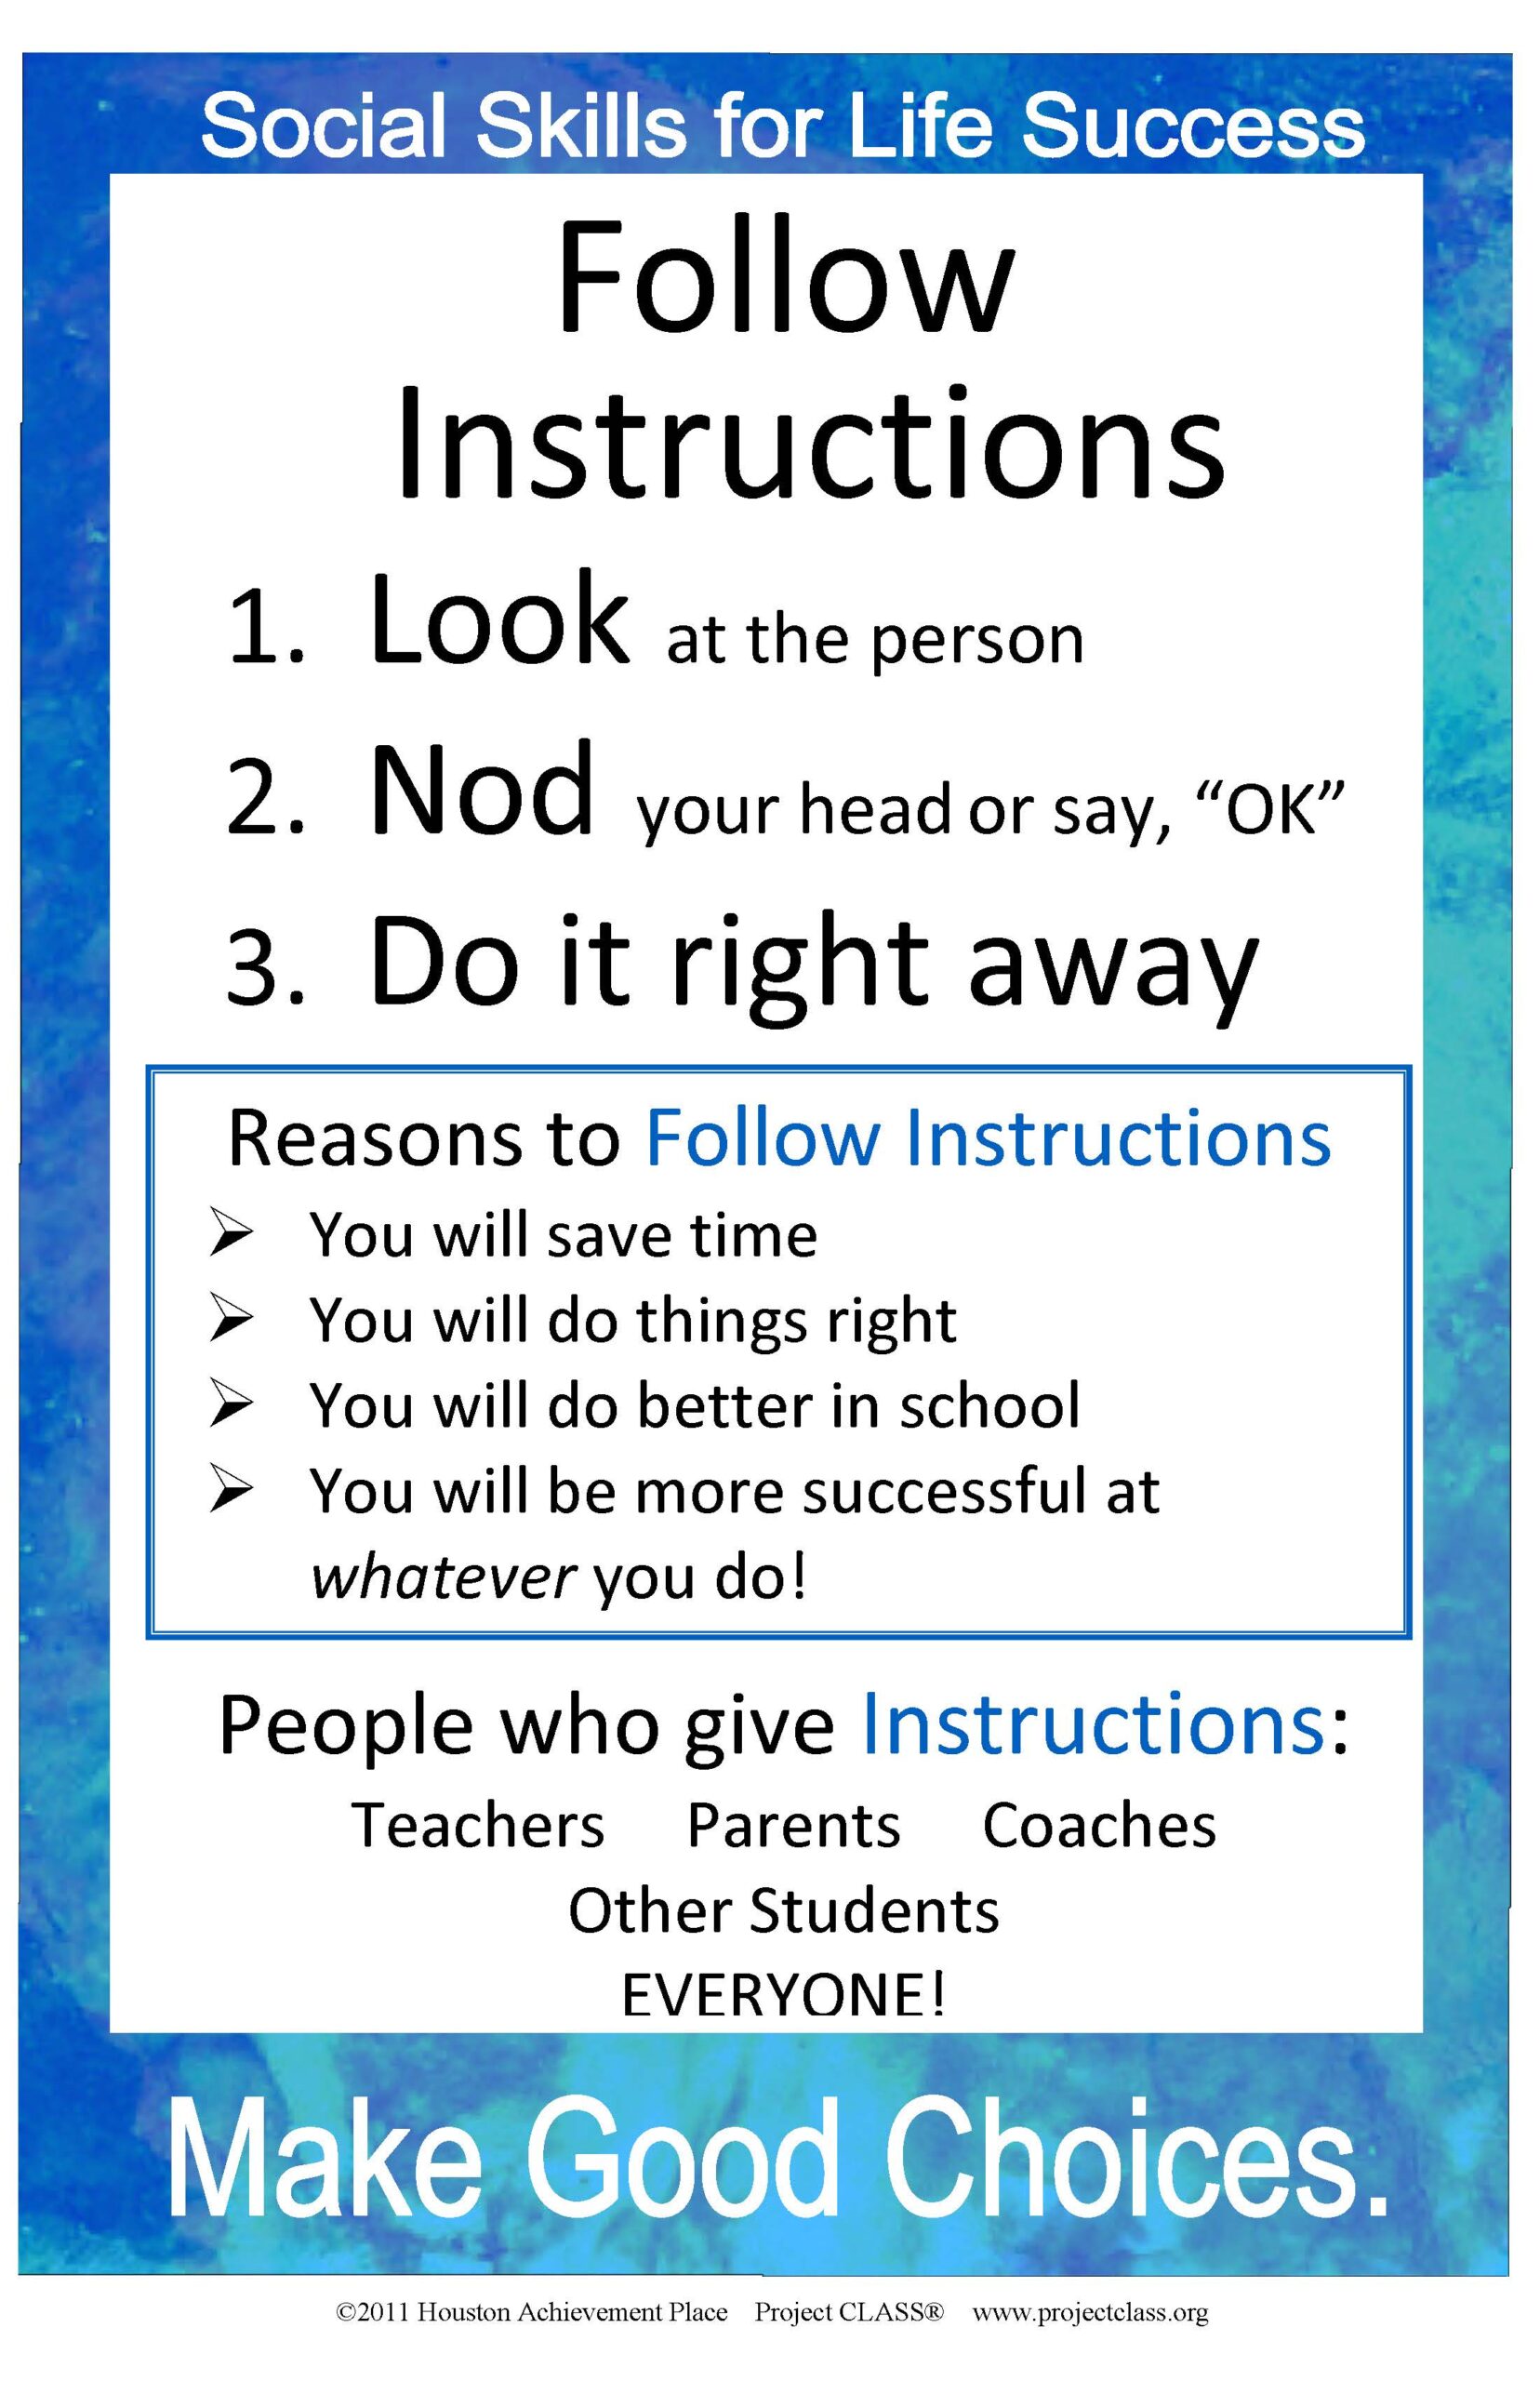 Follow instructions2011withReasons